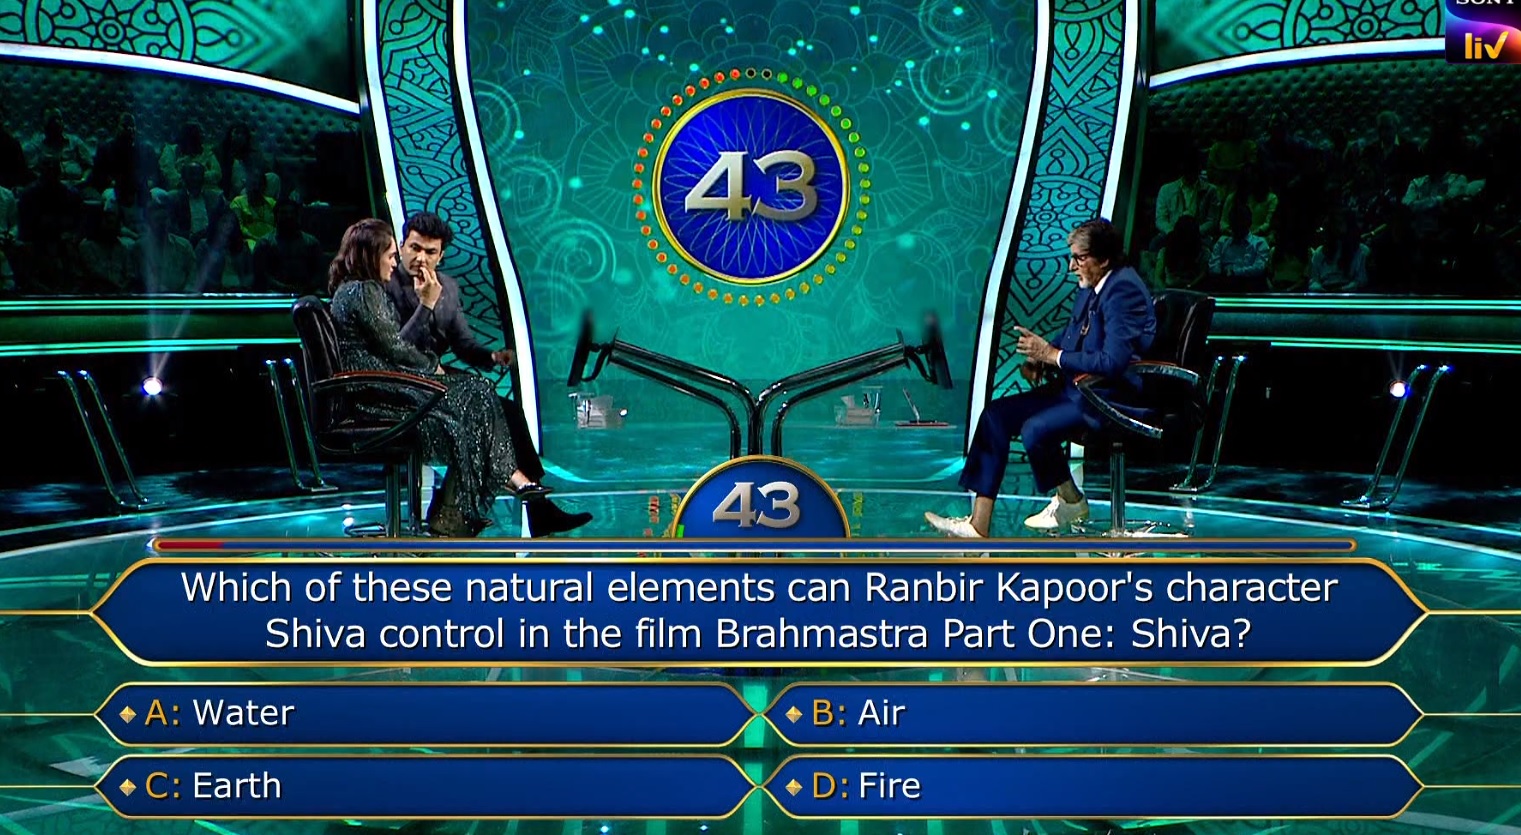 Ques : Which of these natural elements can Ranbir Kapoor’s character Shiva control in the film Brahmastra Part one : Shiva?